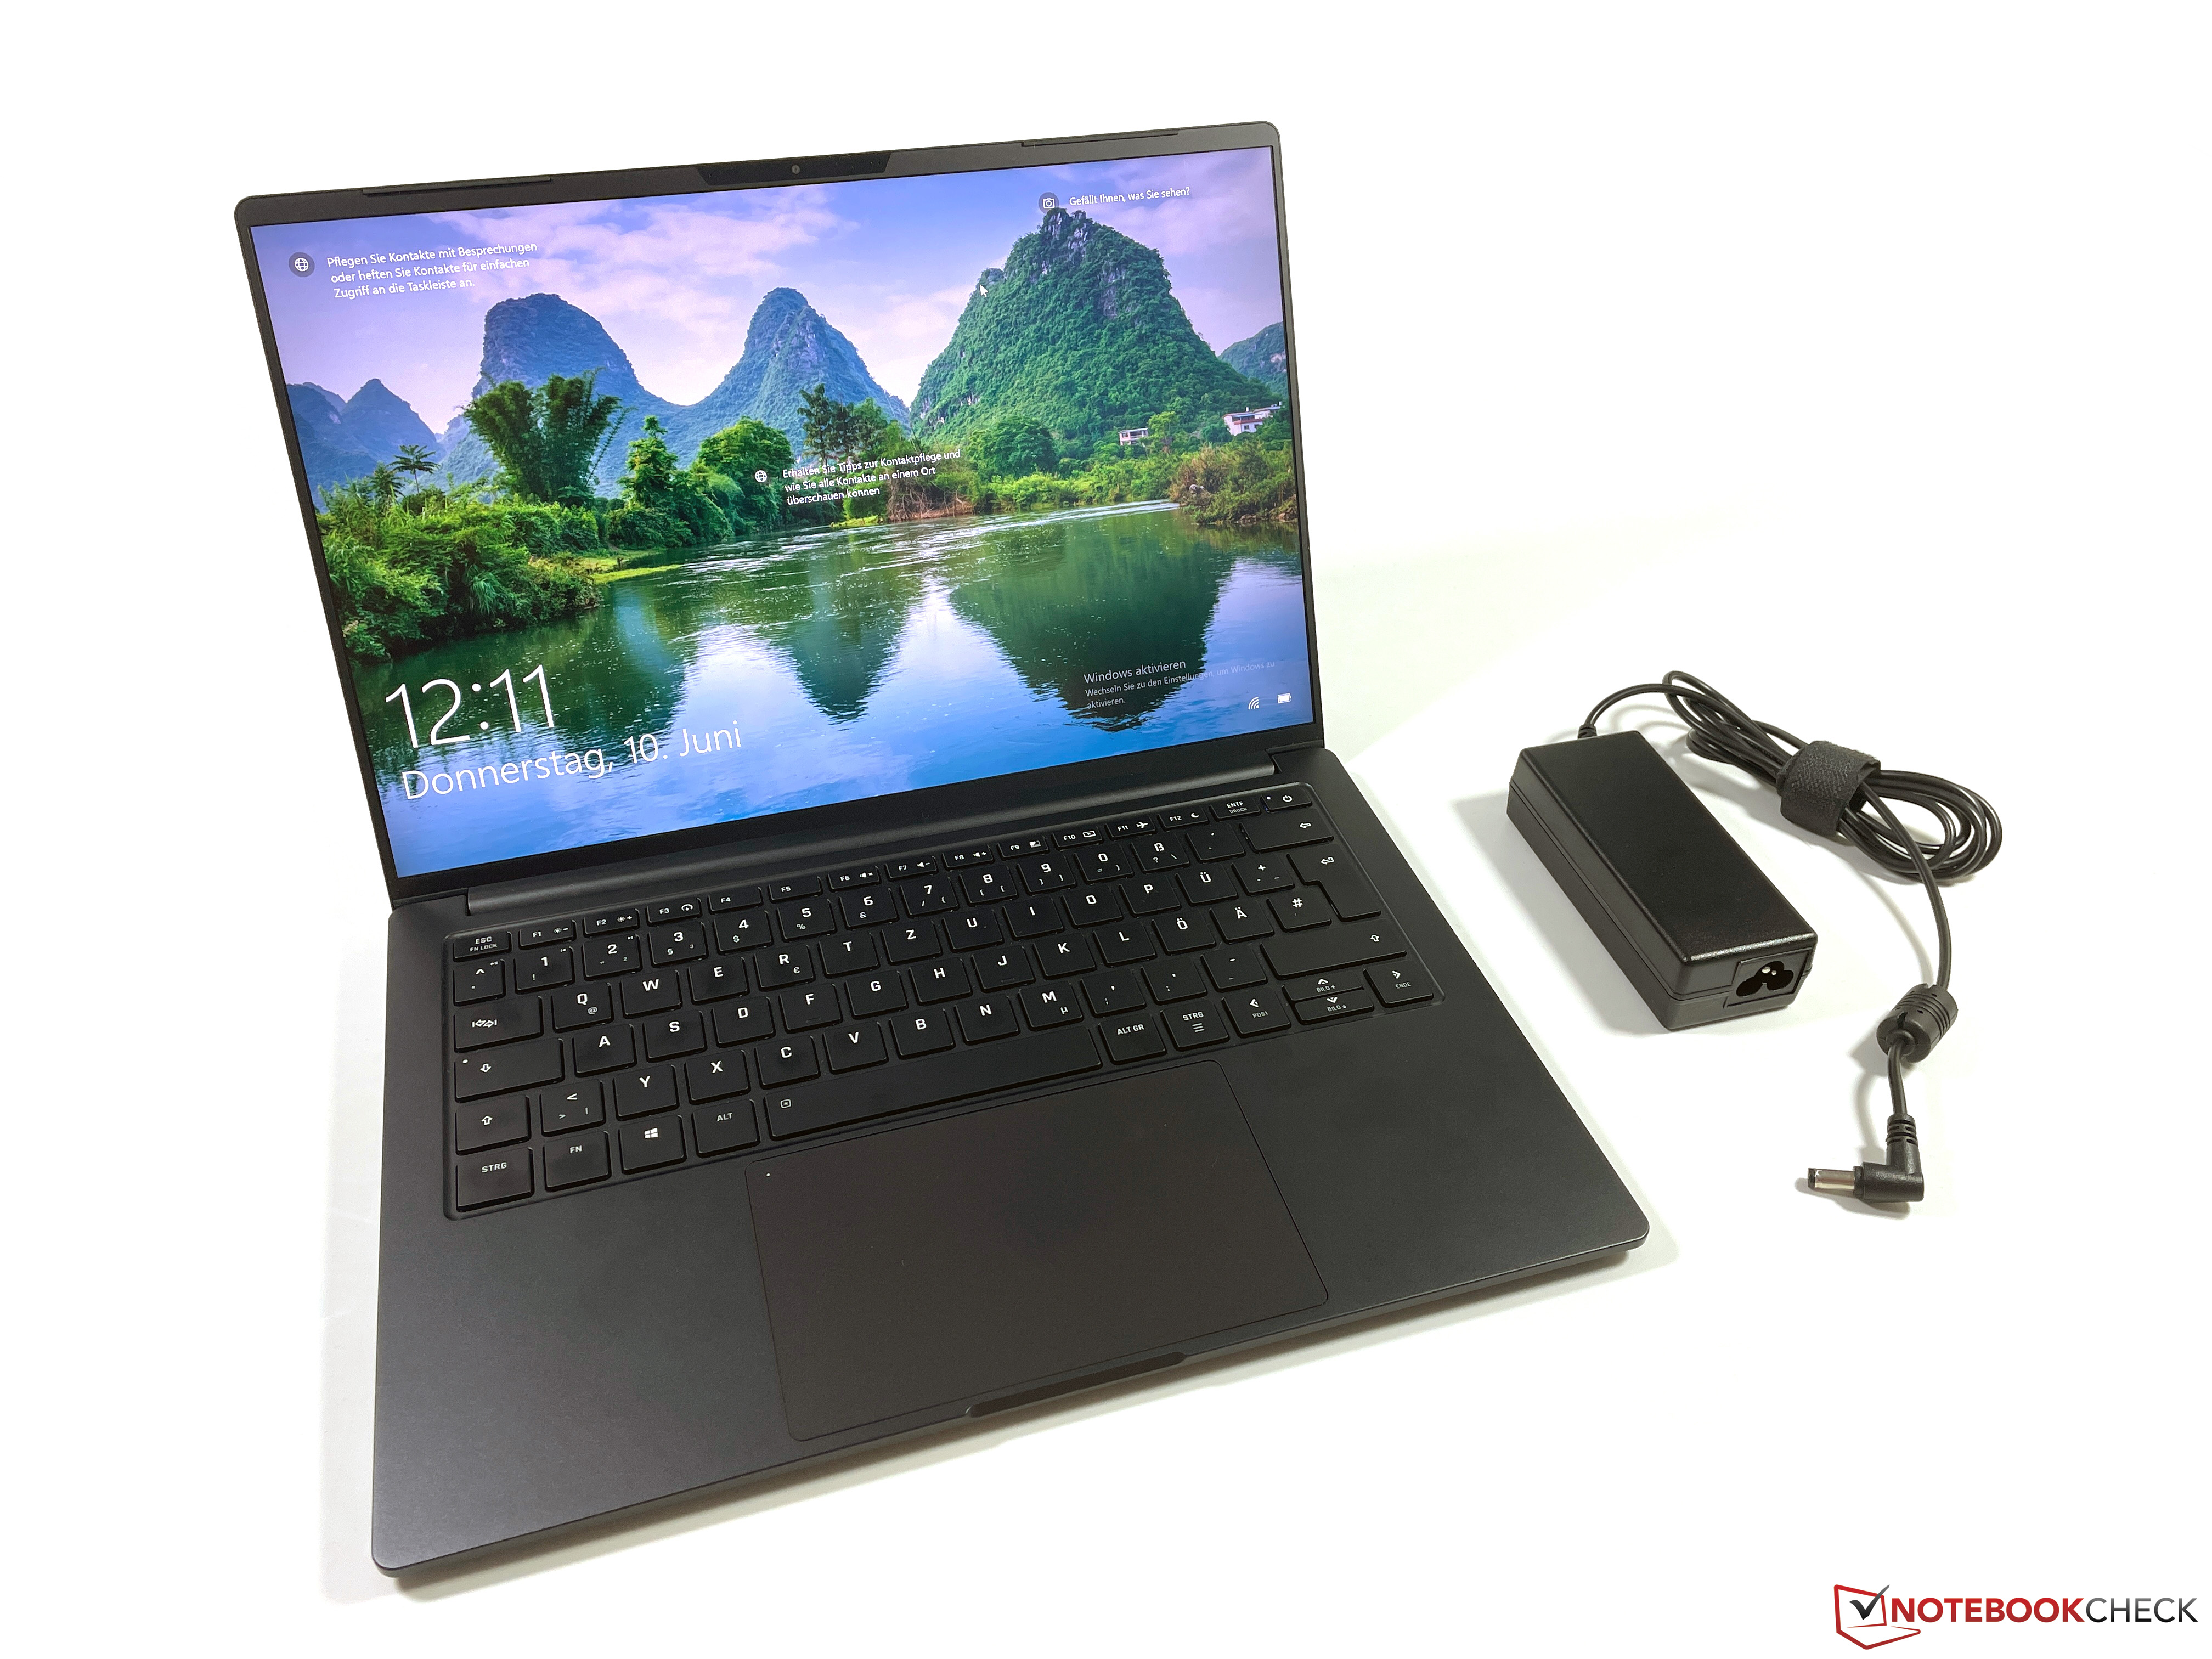 Schenker Vision 14 Laptop Review - Perfect Ultrabook with 1 kg and 